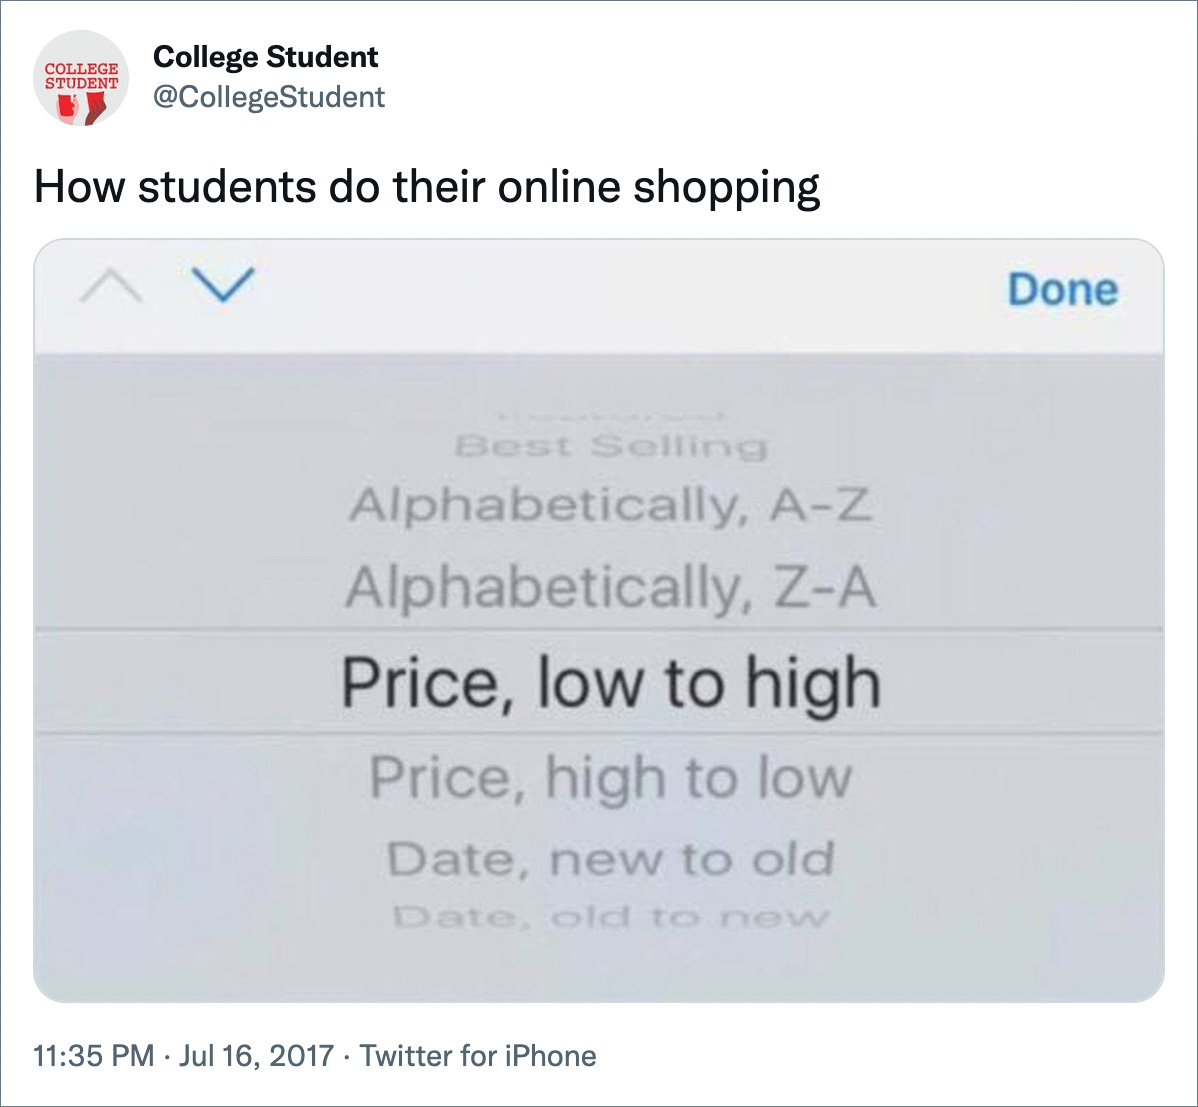 How students do their online shopping